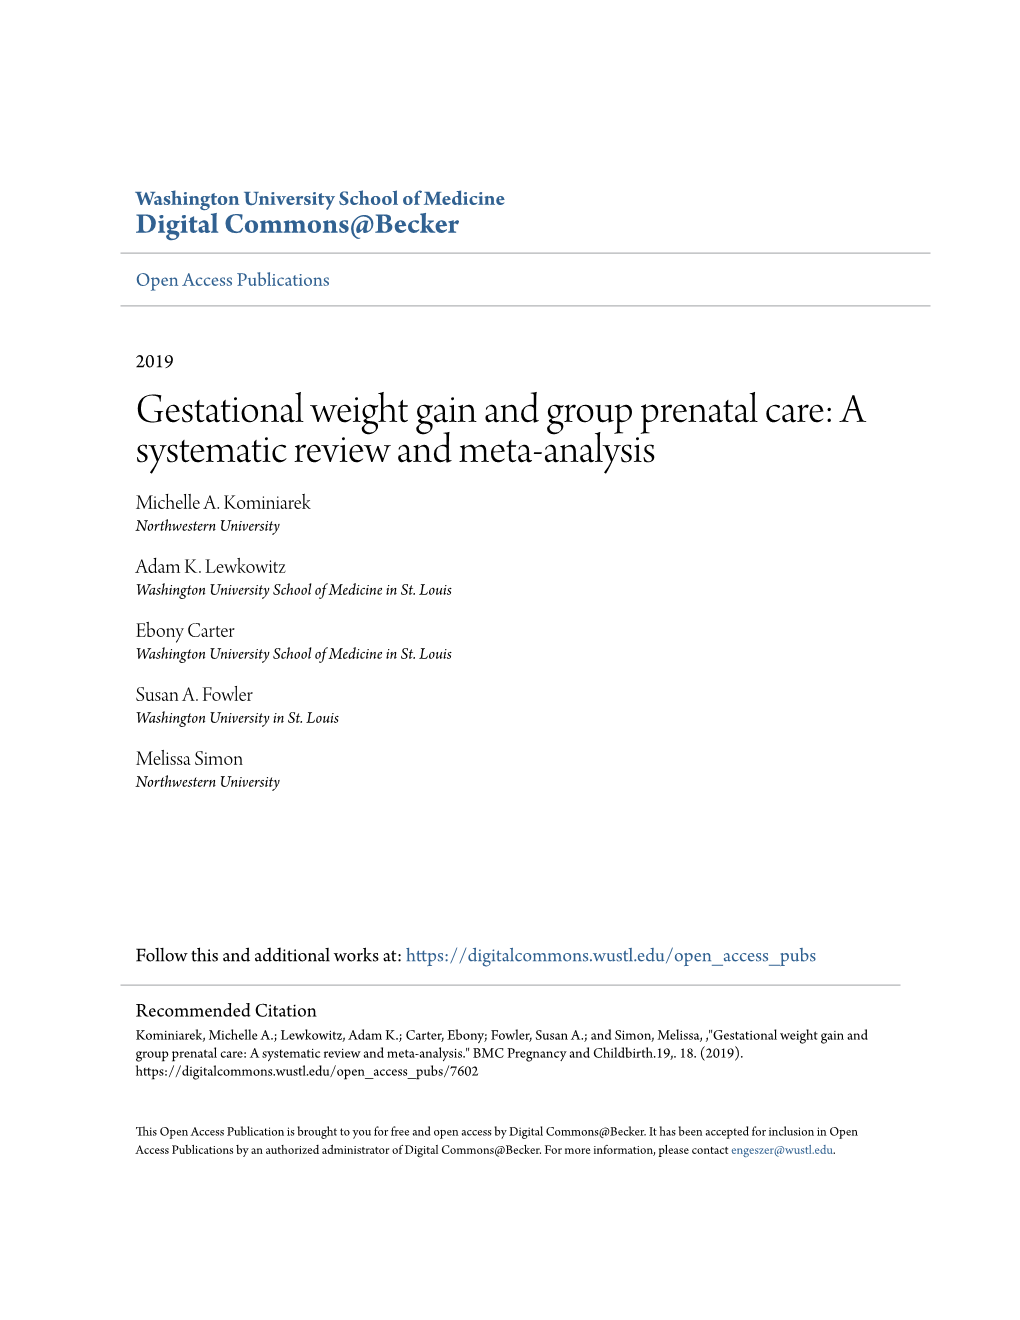 Gestational Weight Gain and Group Prenatal Care: a Systematic Review and Meta-Analysis Michelle A